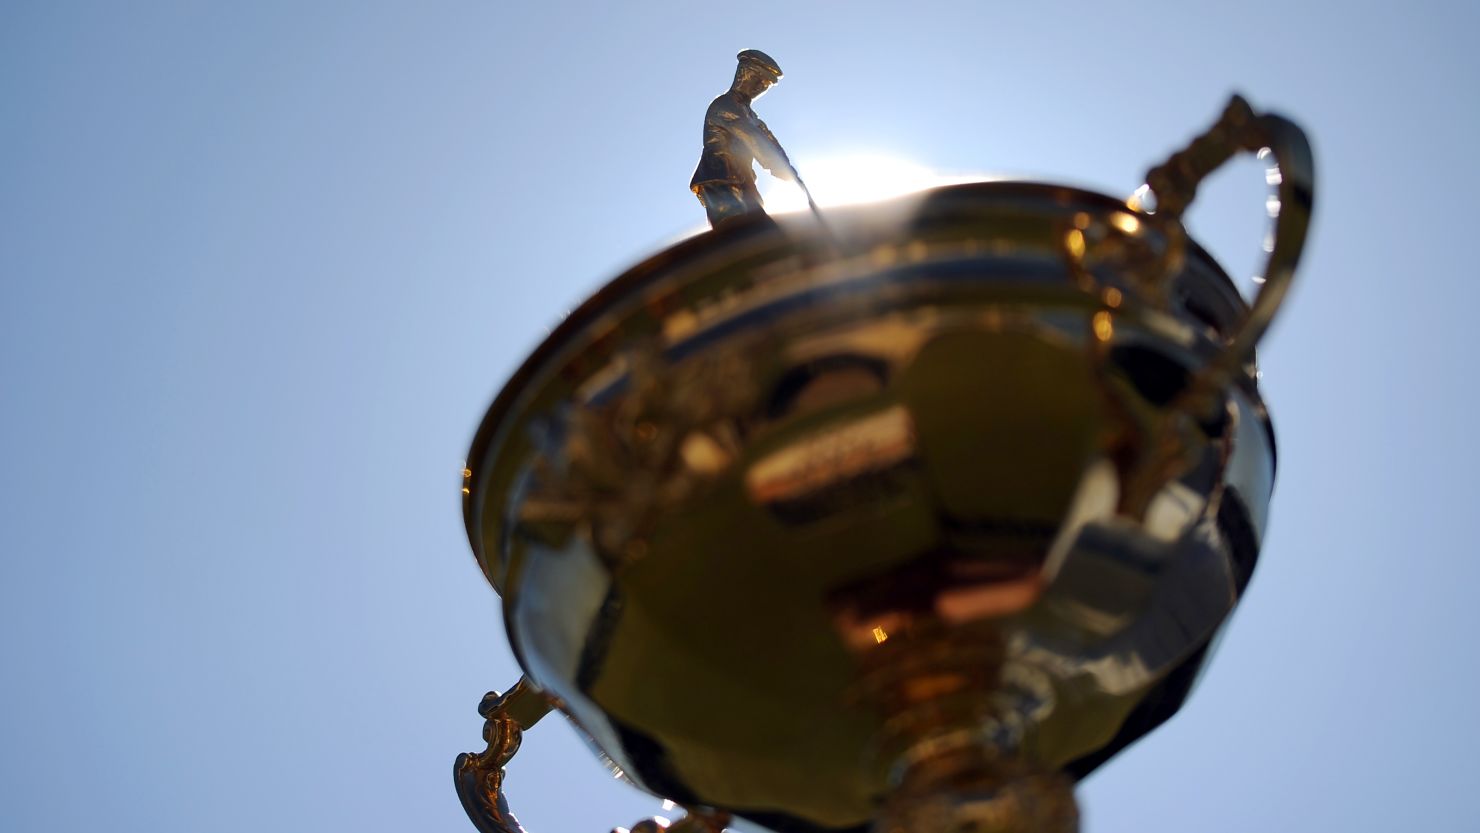 The Ryder Cup was first played between Britain and the U.S. in 1927.